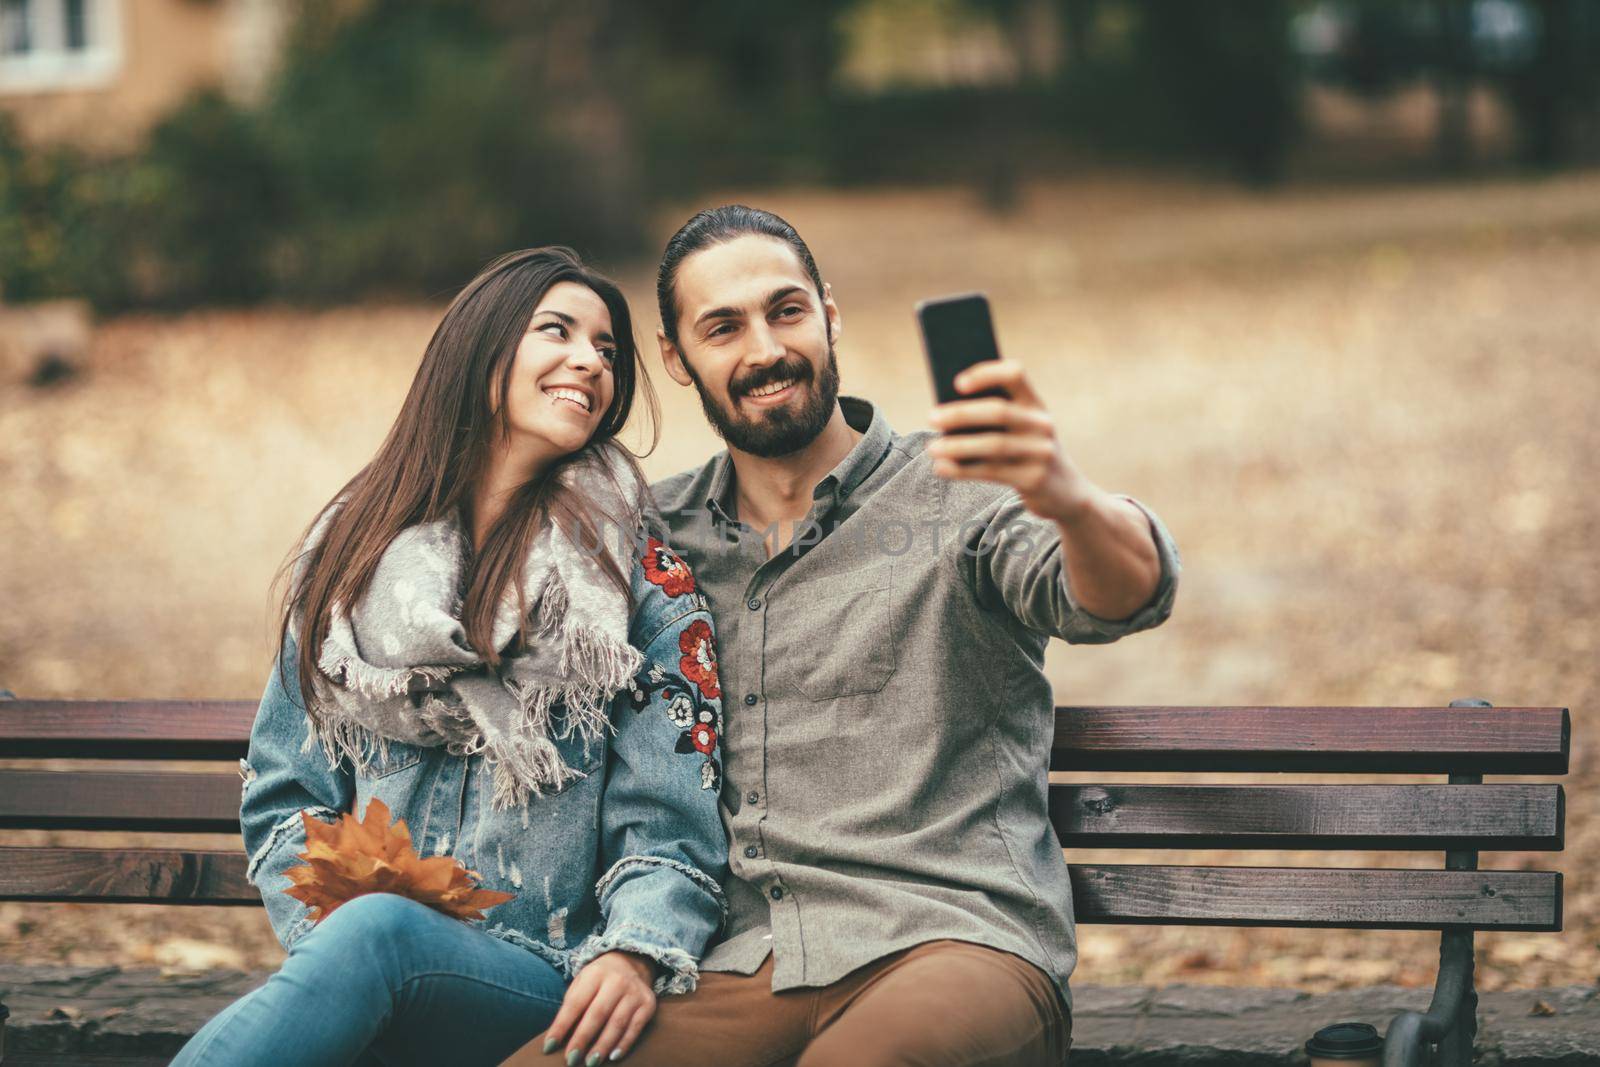 Beautiful smiling couple enjoying in sunny city park in autumn colors looking each other. They are sitting on the bench and having fun with smarthphone taking selfie.